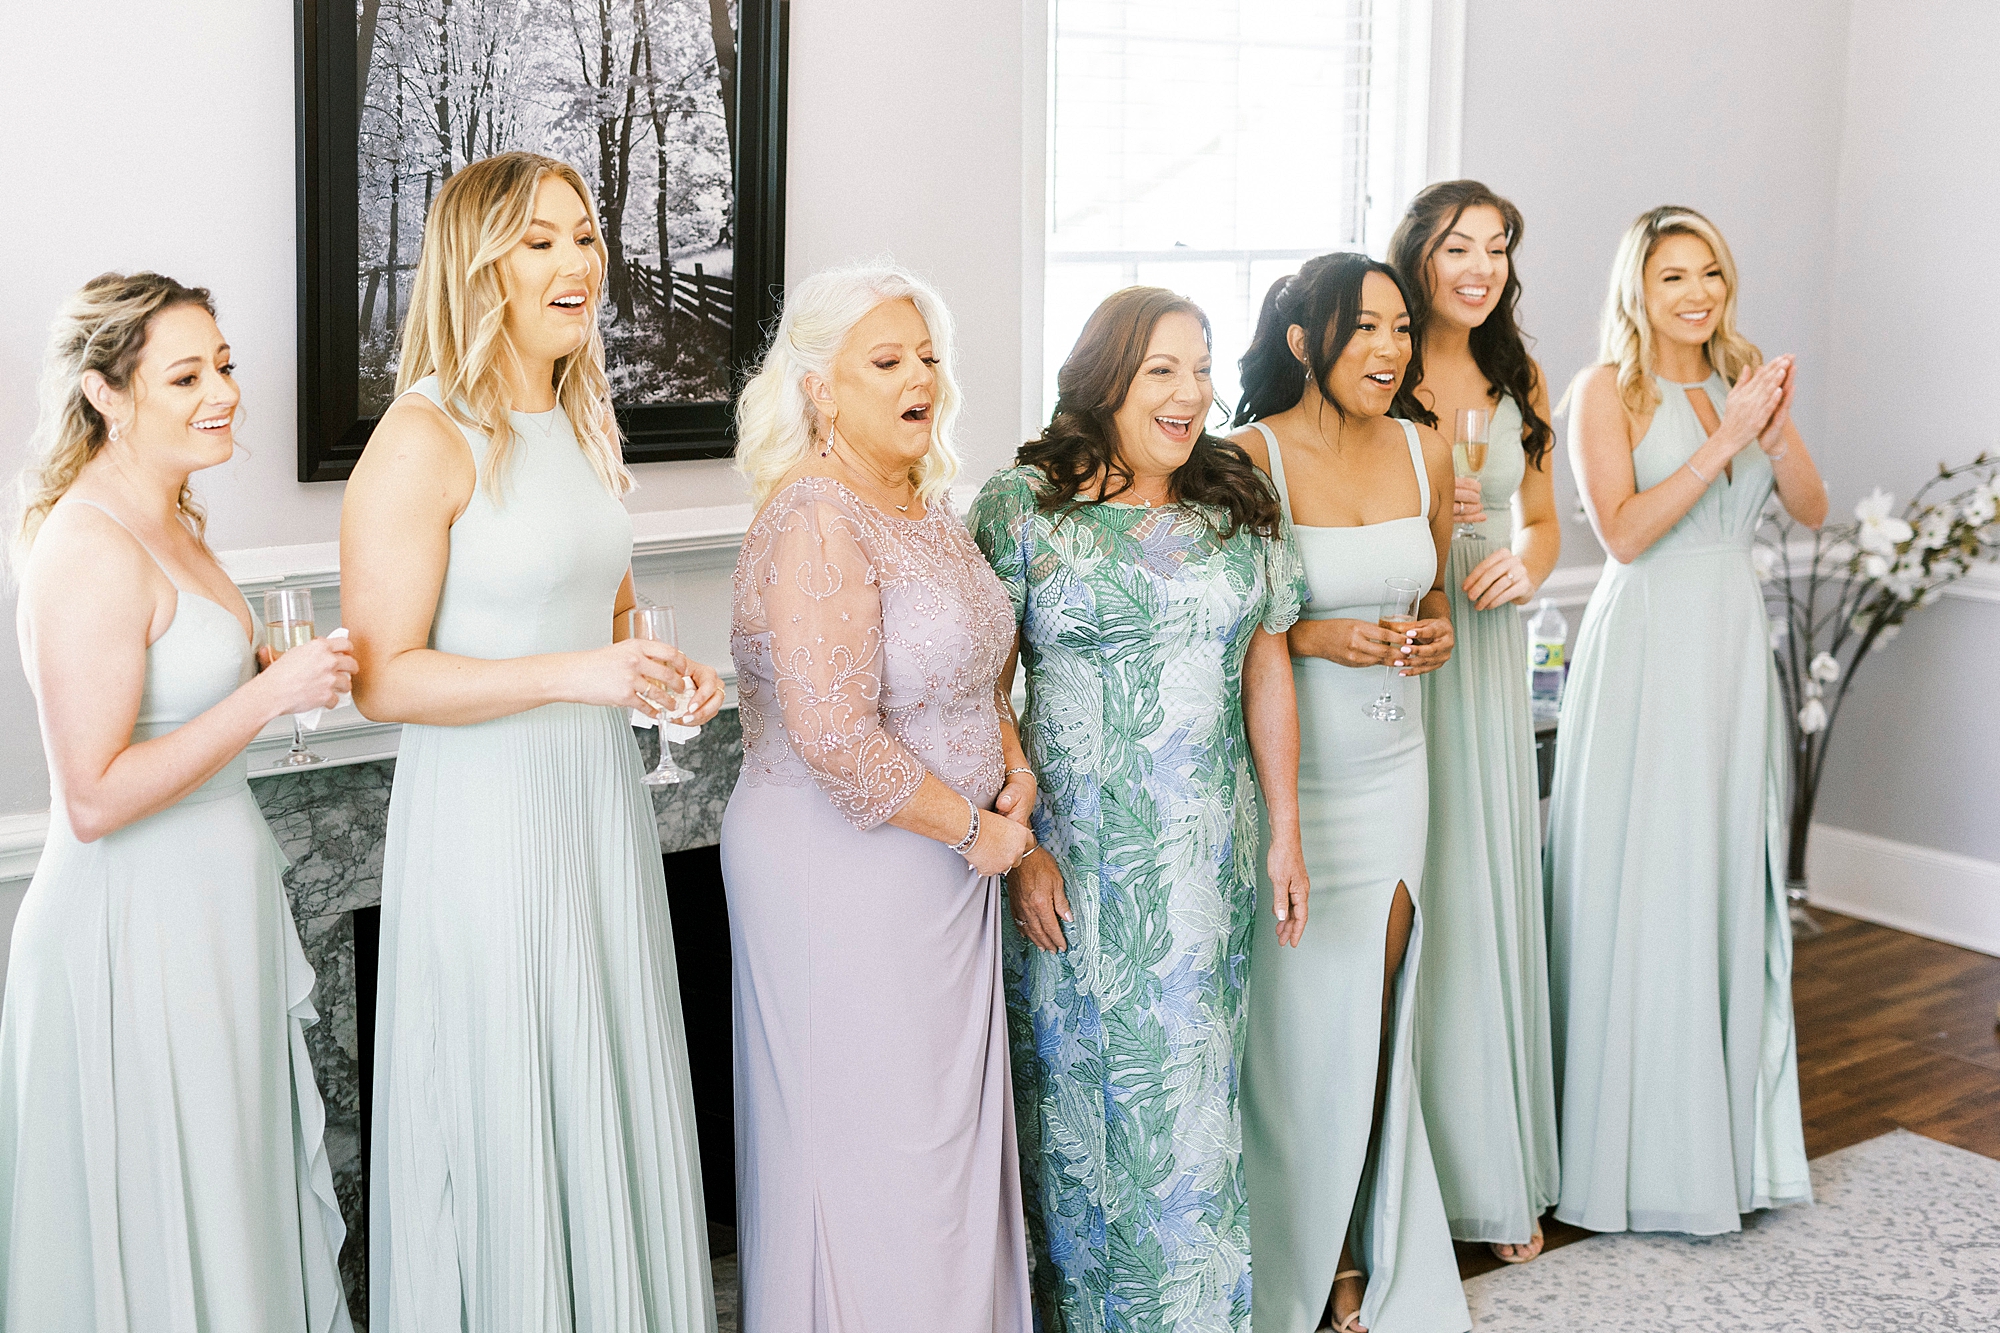 bridesmaids and mothers react to bride in wedding gown